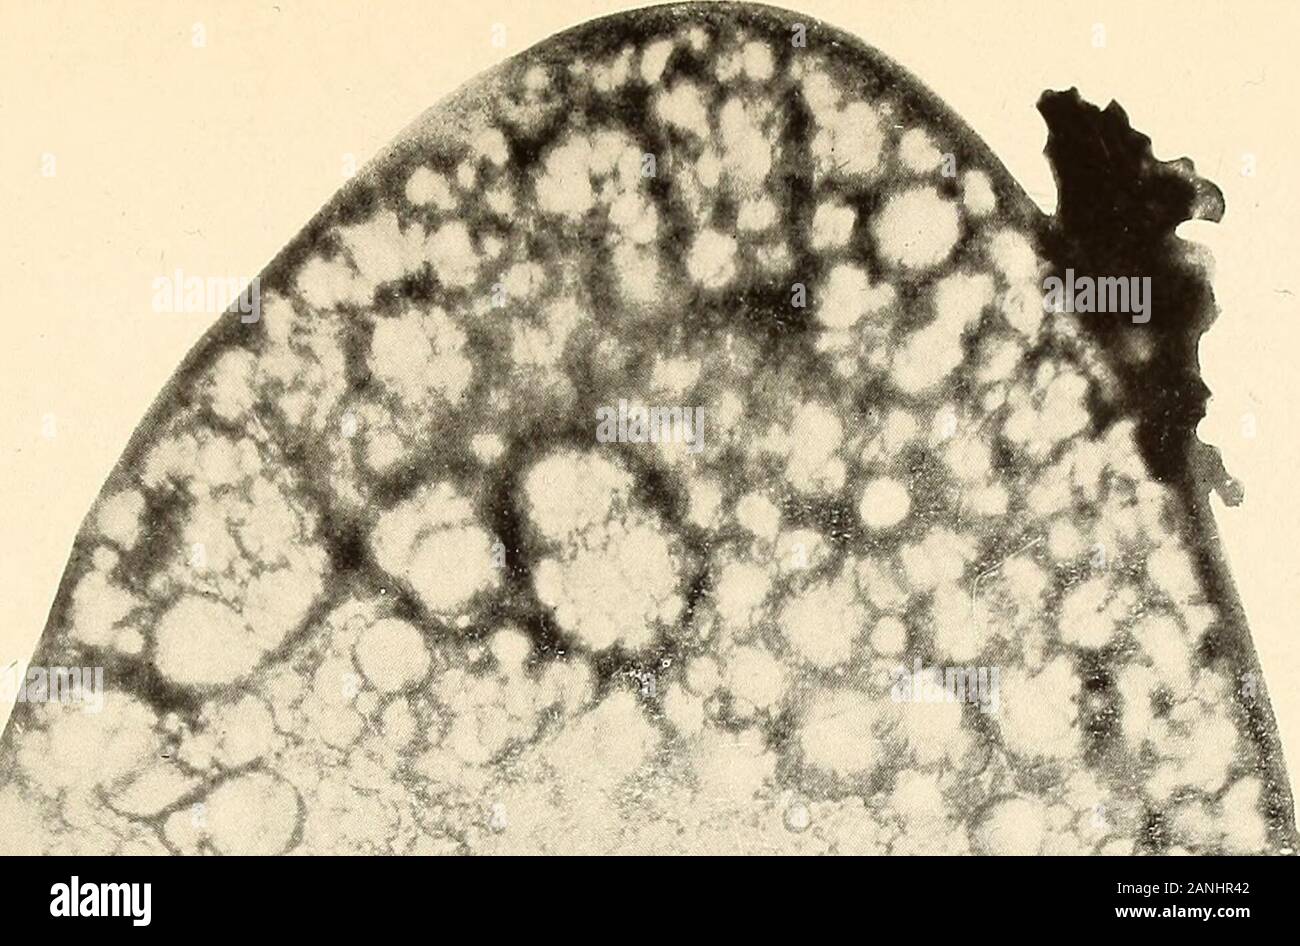 Annual report . Miastor embi yos PLATE 31 165 Miastor ? americana Felt i Anterior extremity of embryo illustrated in figure I of the preceding plate. x 3002 Middle portion of same embryo, x 300 166 Plate 31. 19 Stock Photo